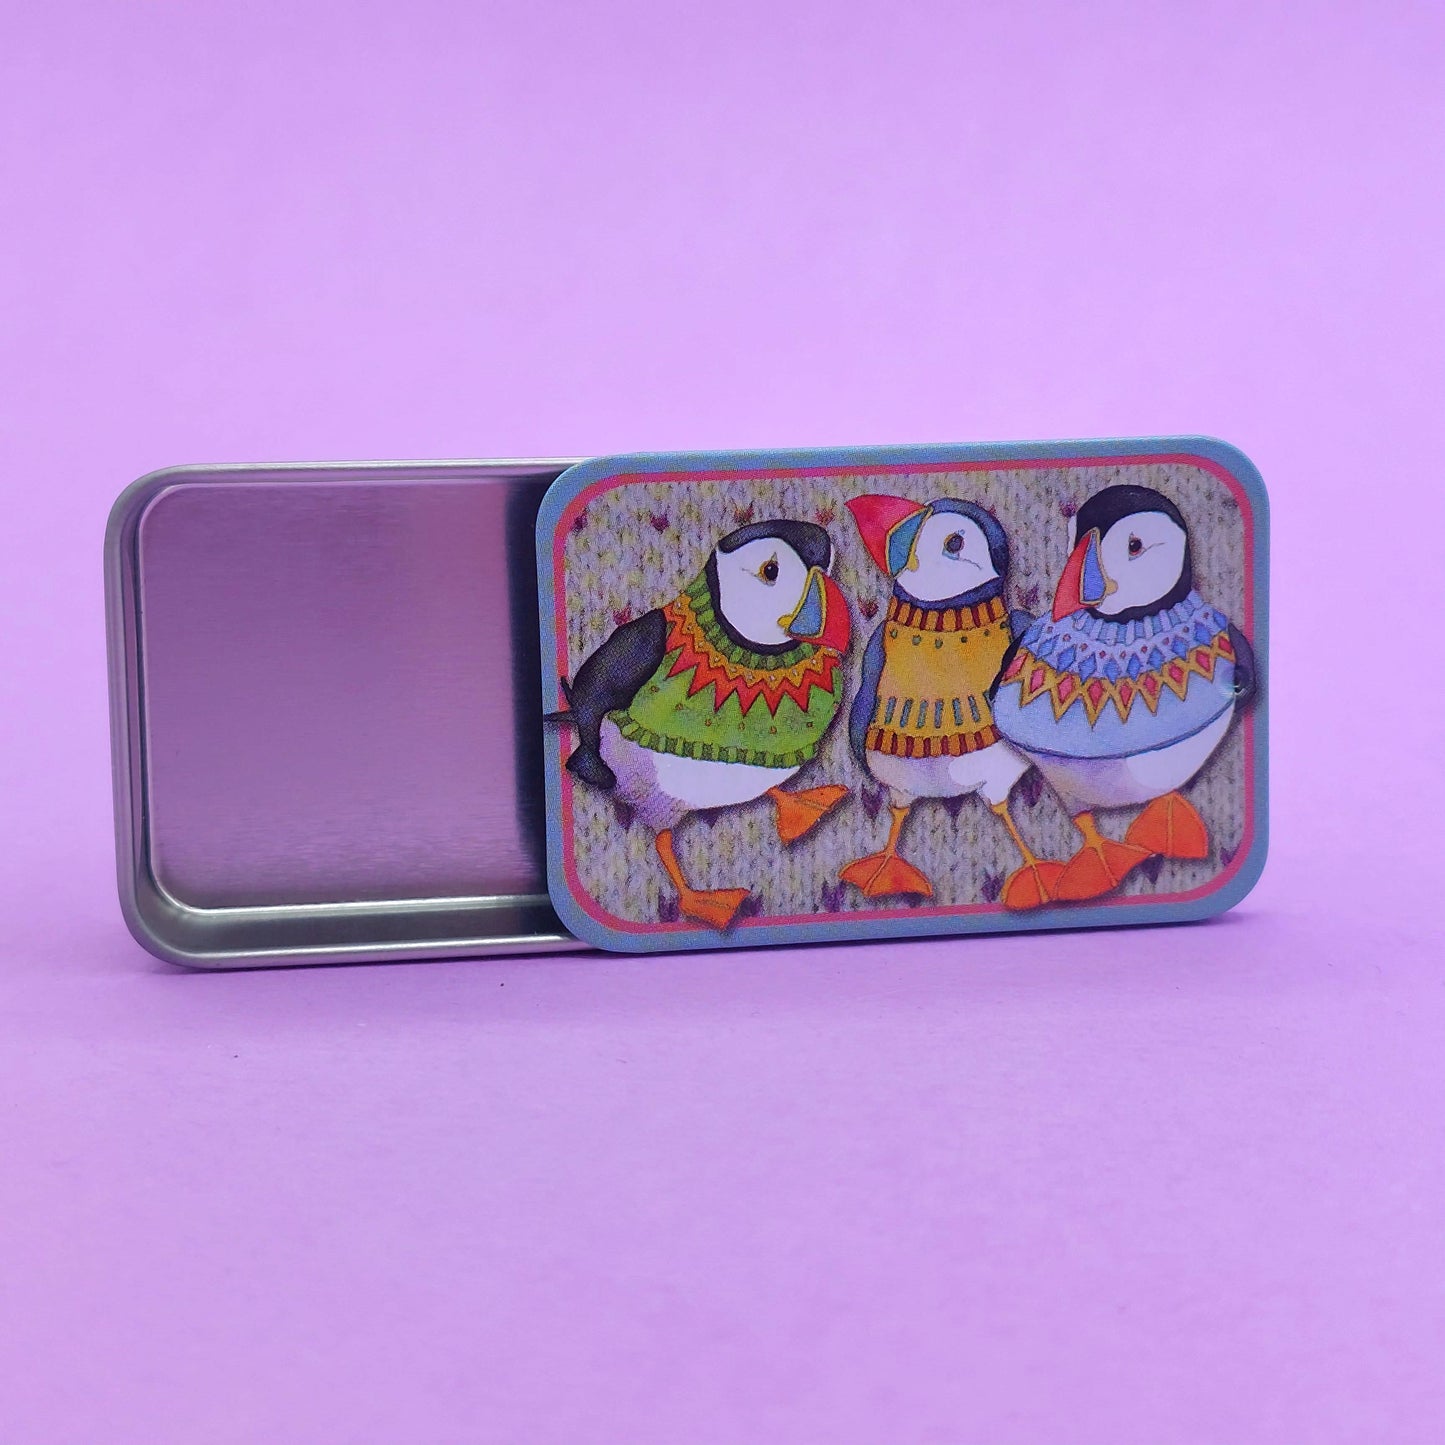 Cute Pocket Tins - choose from 4 designs